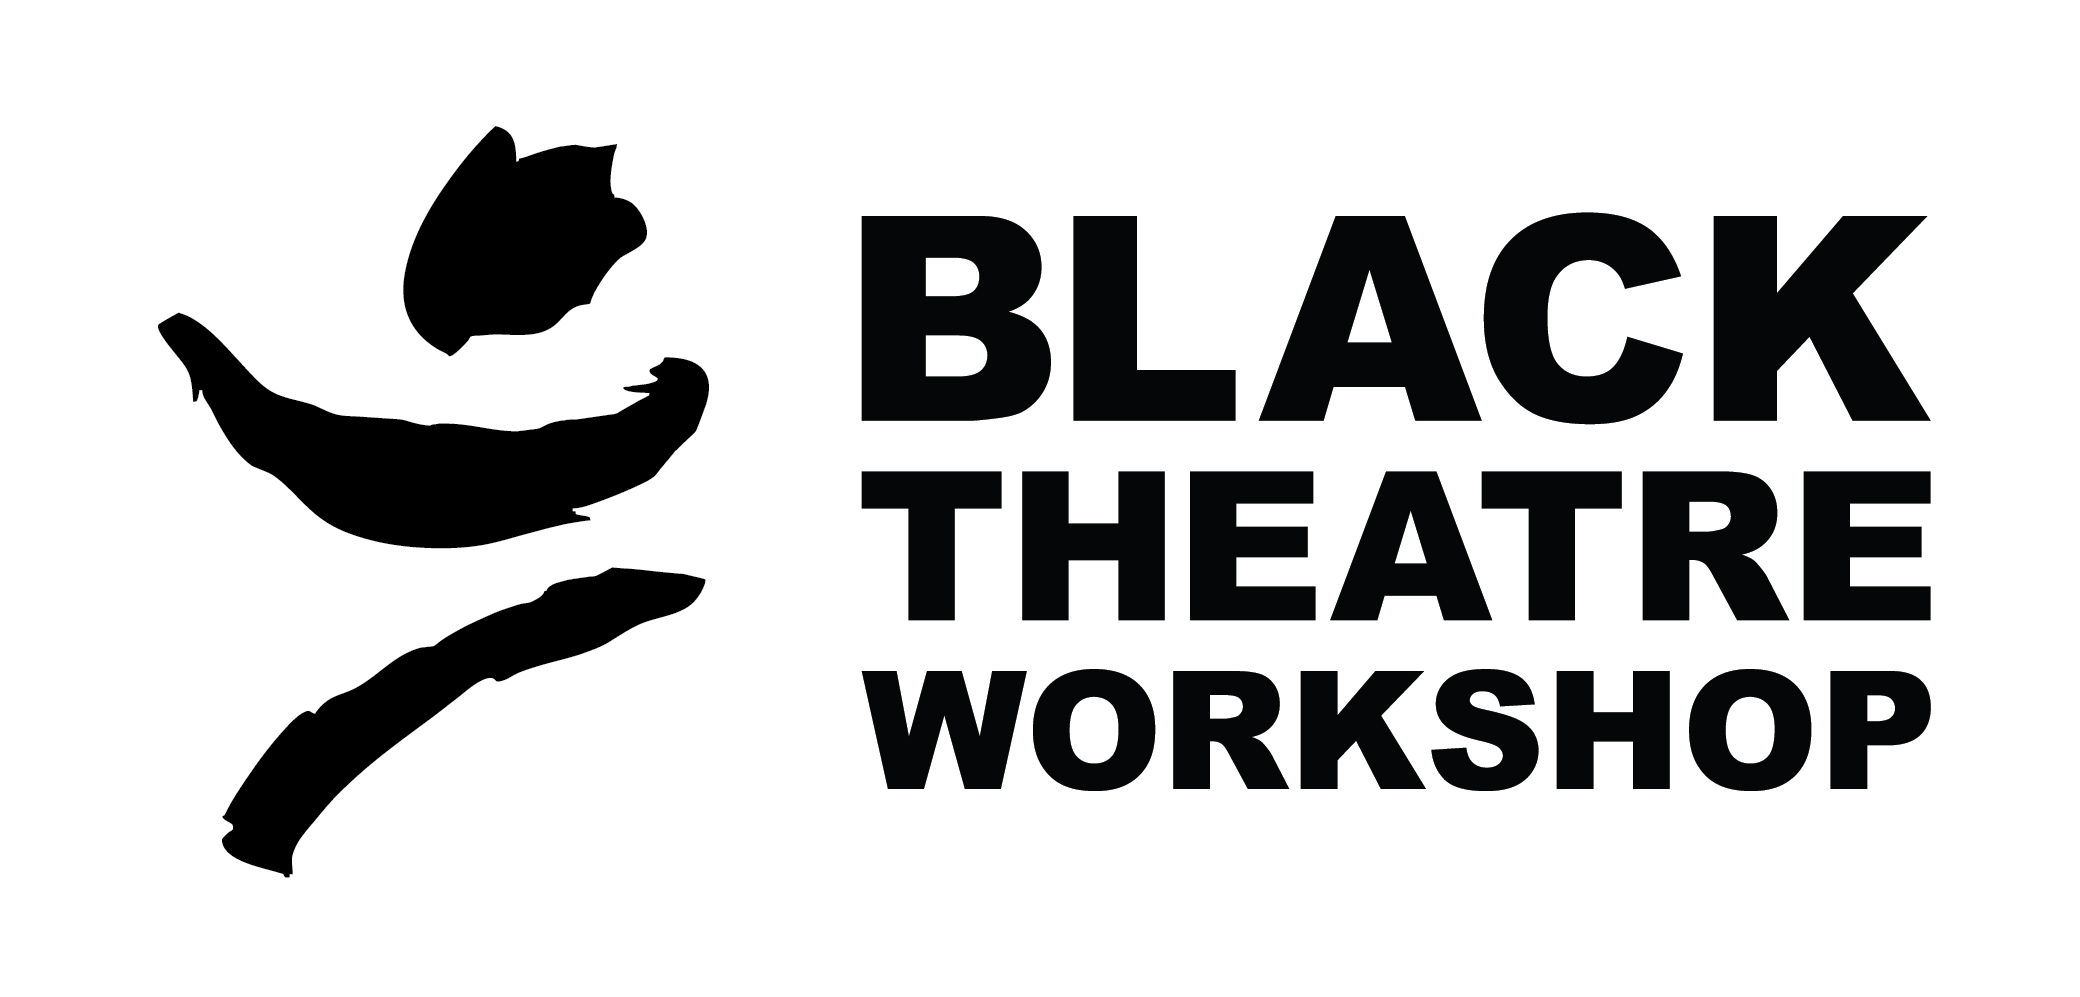 Black Theatre Workshop Logo and Wordmark in an all caps sans serif block text. To the left is an abstract logo of a shape and 2 lines below it